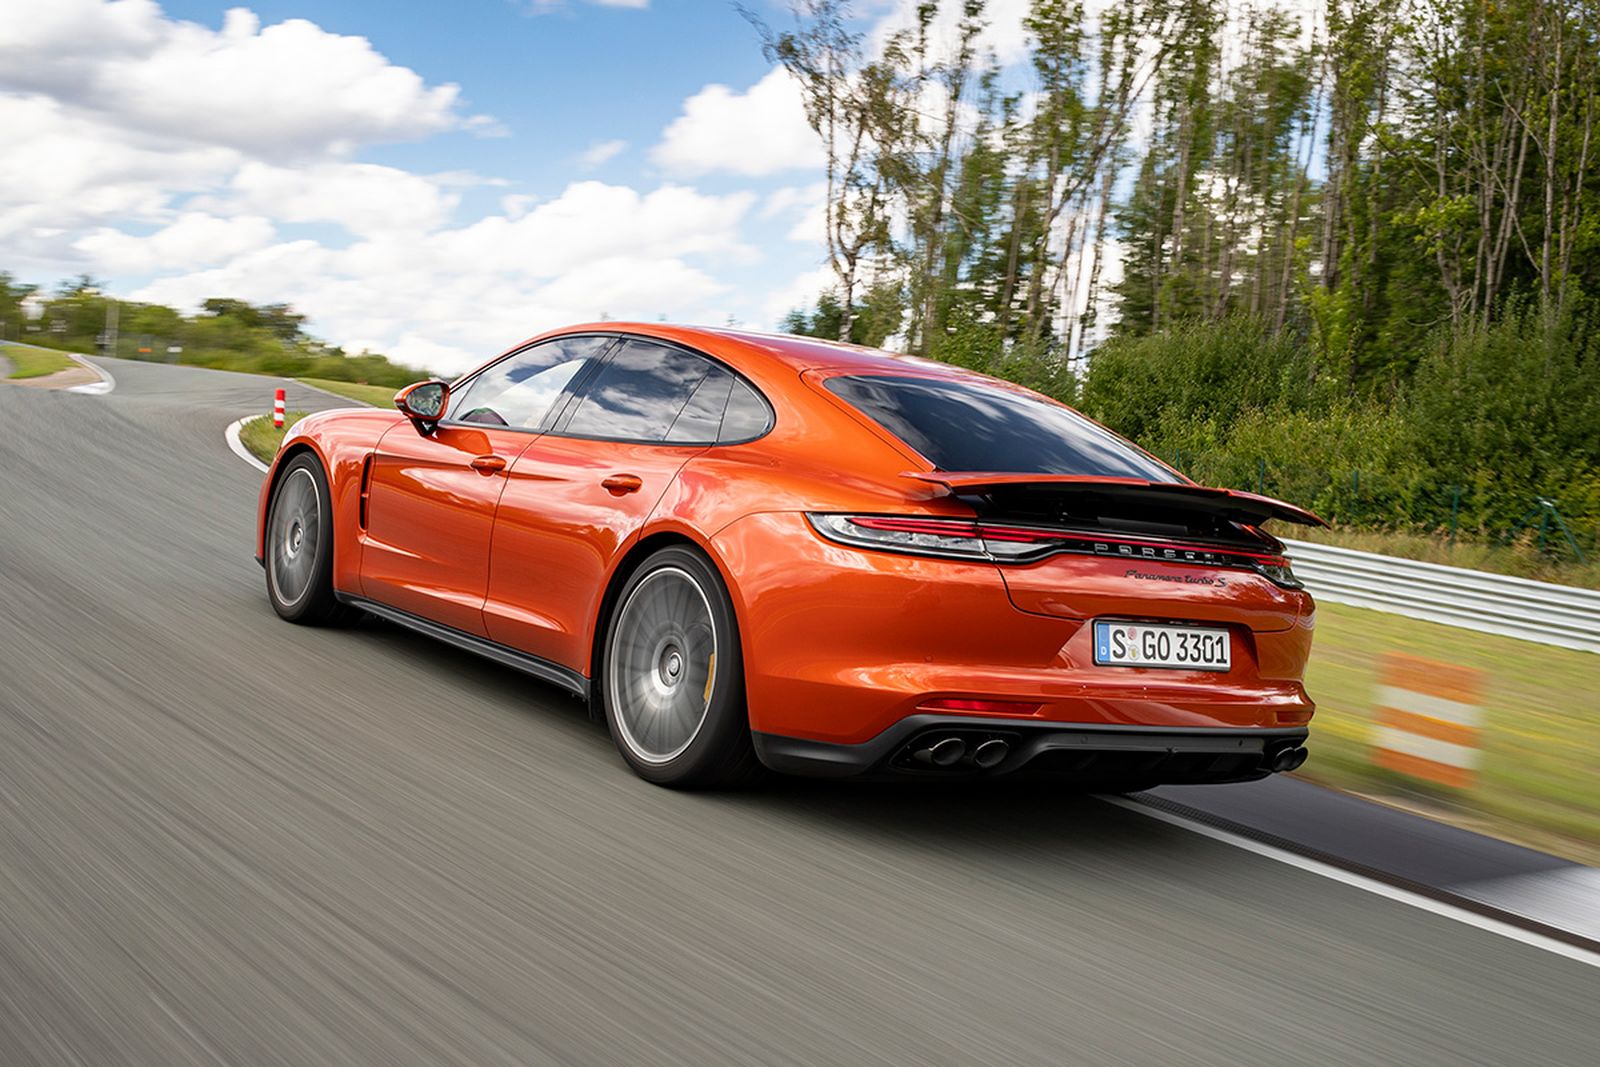 A flashy Papaya Metallic was the chosen launch color for the new Panamera Turbo S